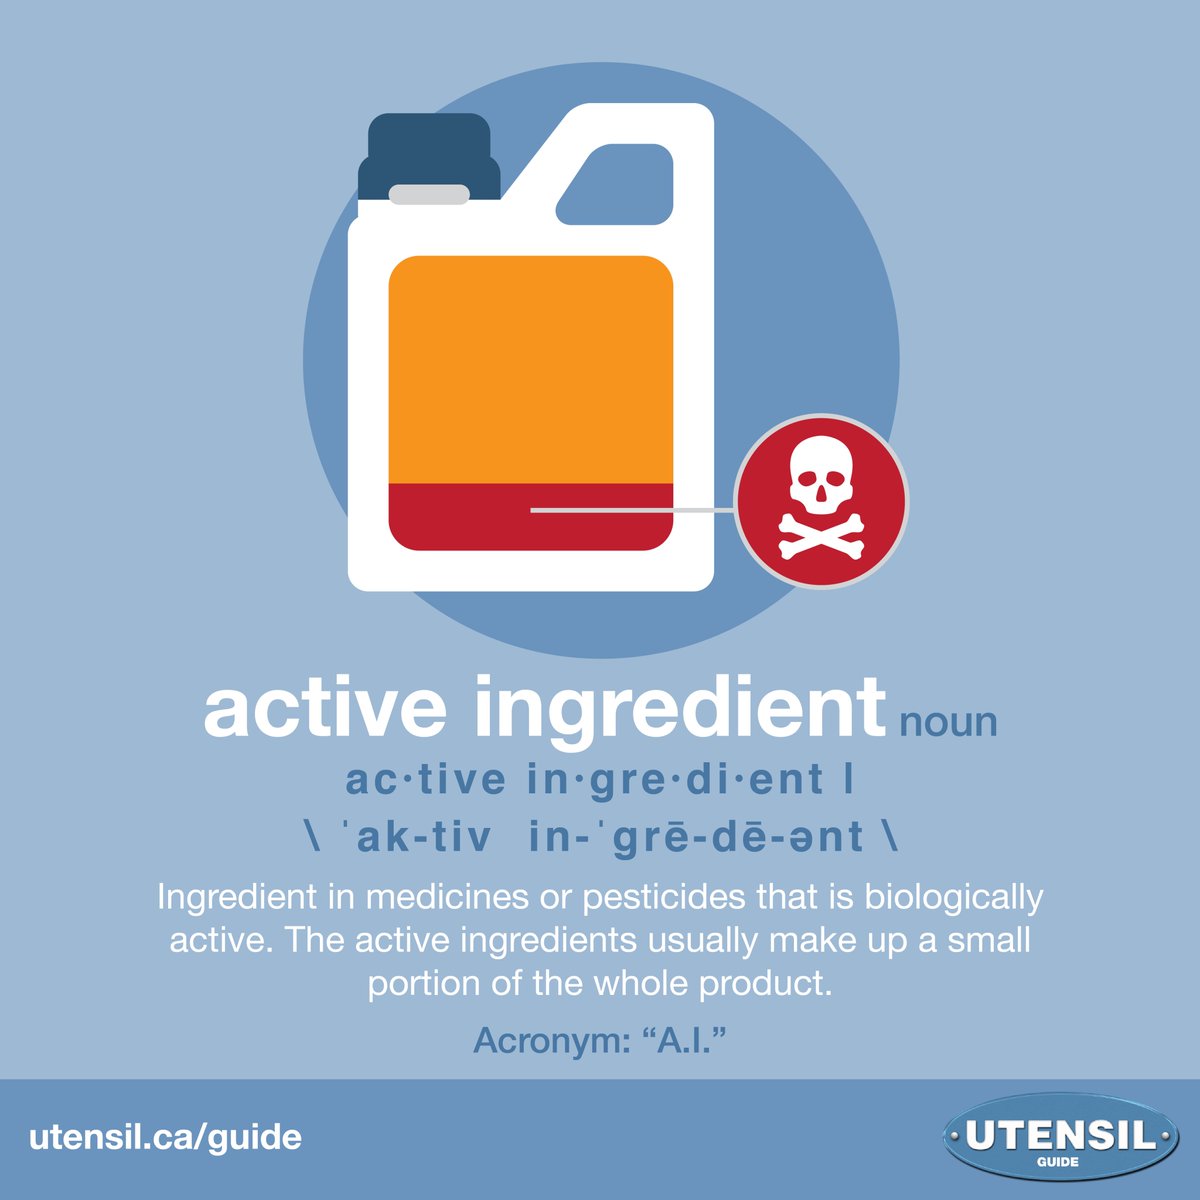 ACTIVE INGREDIENT (noun) Ingredient in medicines or pesticides that is biologically active. The active ingredients usually make up a small portion of the whole product. Acronym: “A.I.” #UtensilGuide #CdnAg #CdnFood Learn more food & farming terms at: utensil.ca/guide